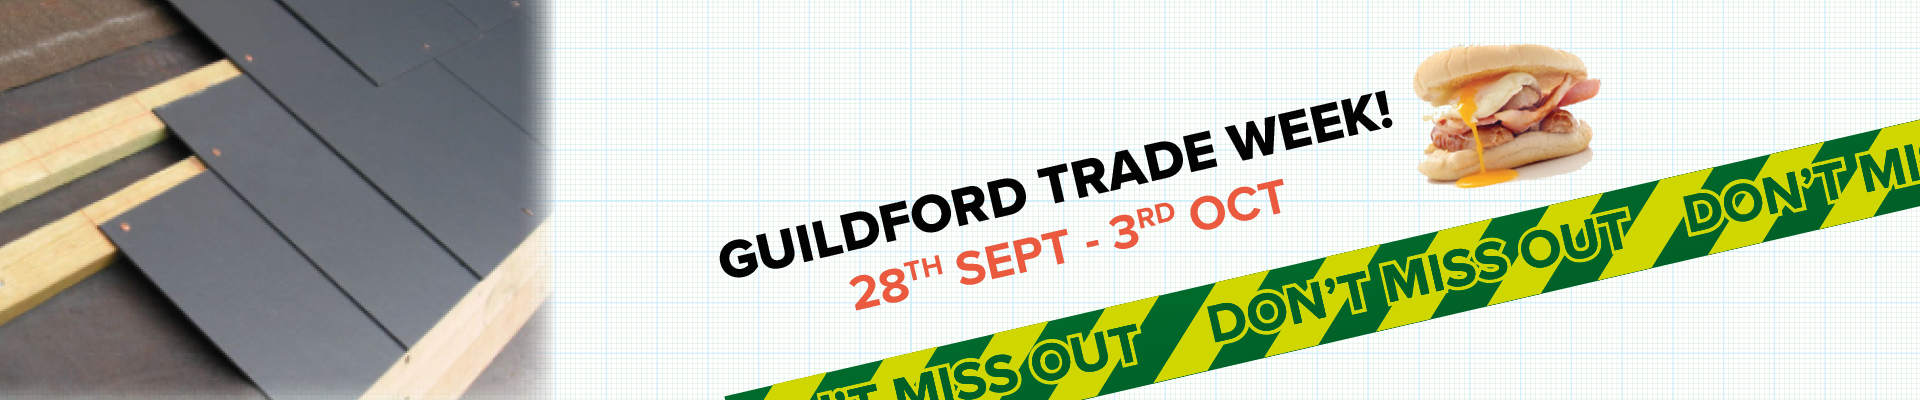 Trade Week with Free Breakfast to Celebrate New Guildford Roofing Branch!